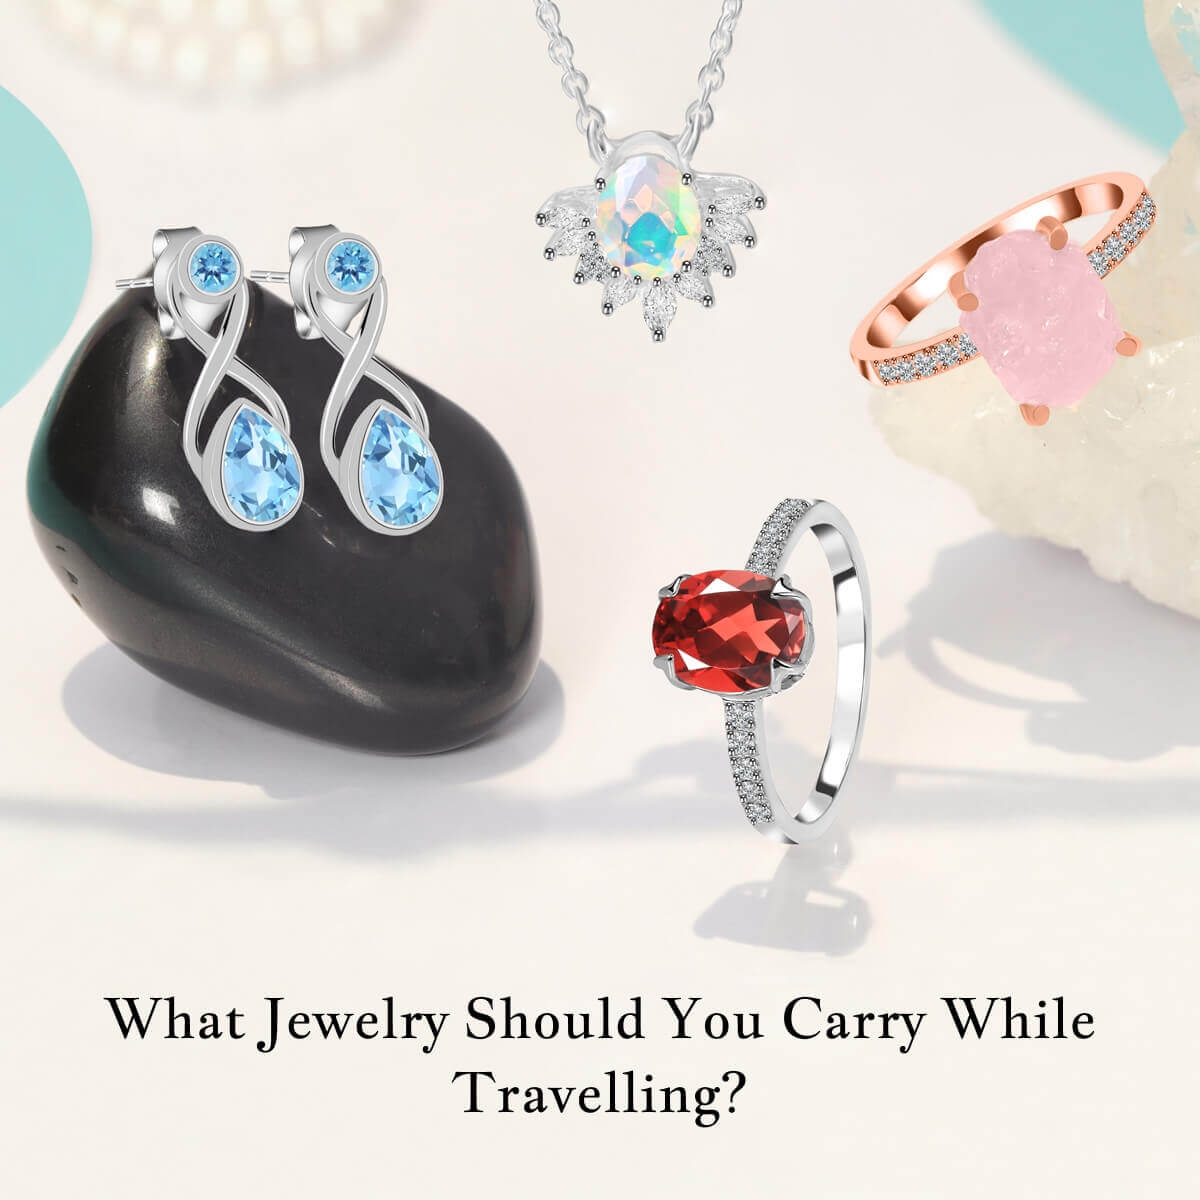 What Jewelry Should You Carry While Travelling?